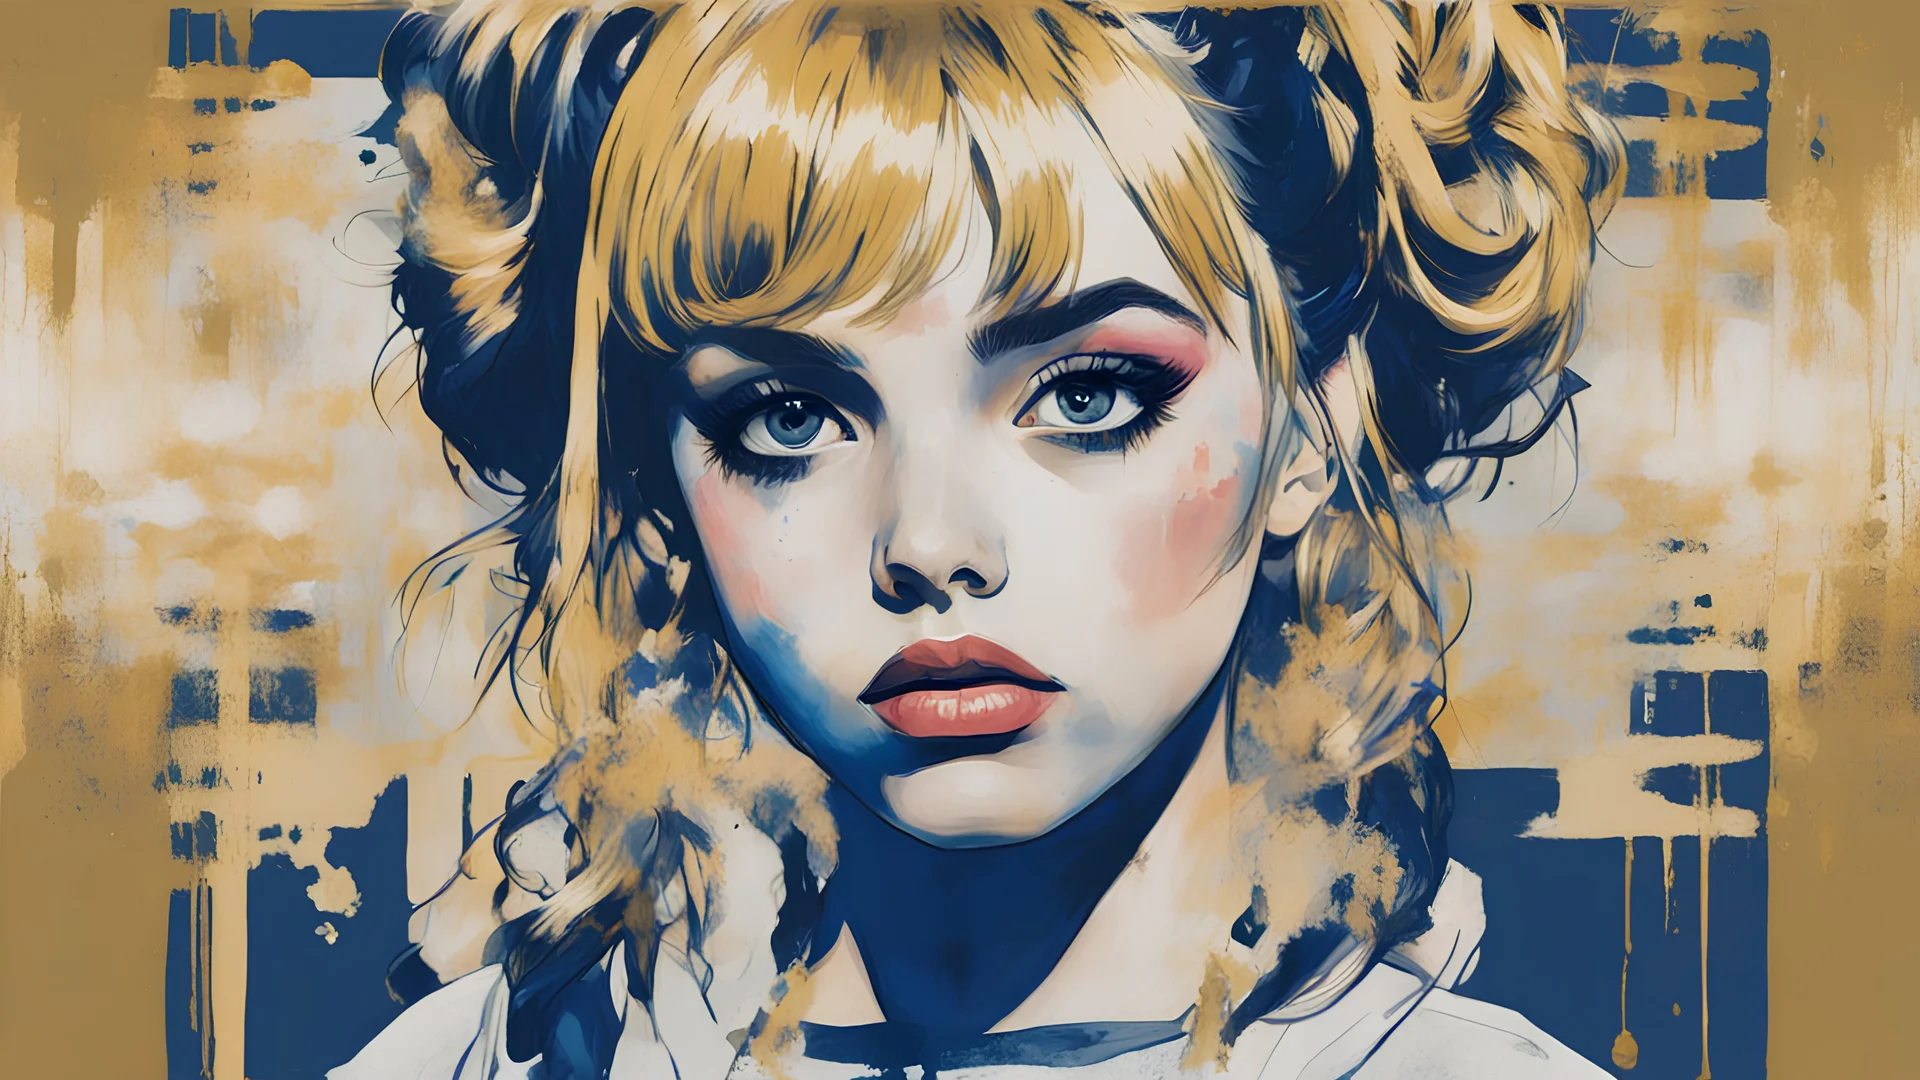 Poster in two gradually, a one side the Singer Danish MØ face and other side the Singer Melanie Martinez face, symmetry, painting by Yoji Shinkawa, darkblue and gold tones,